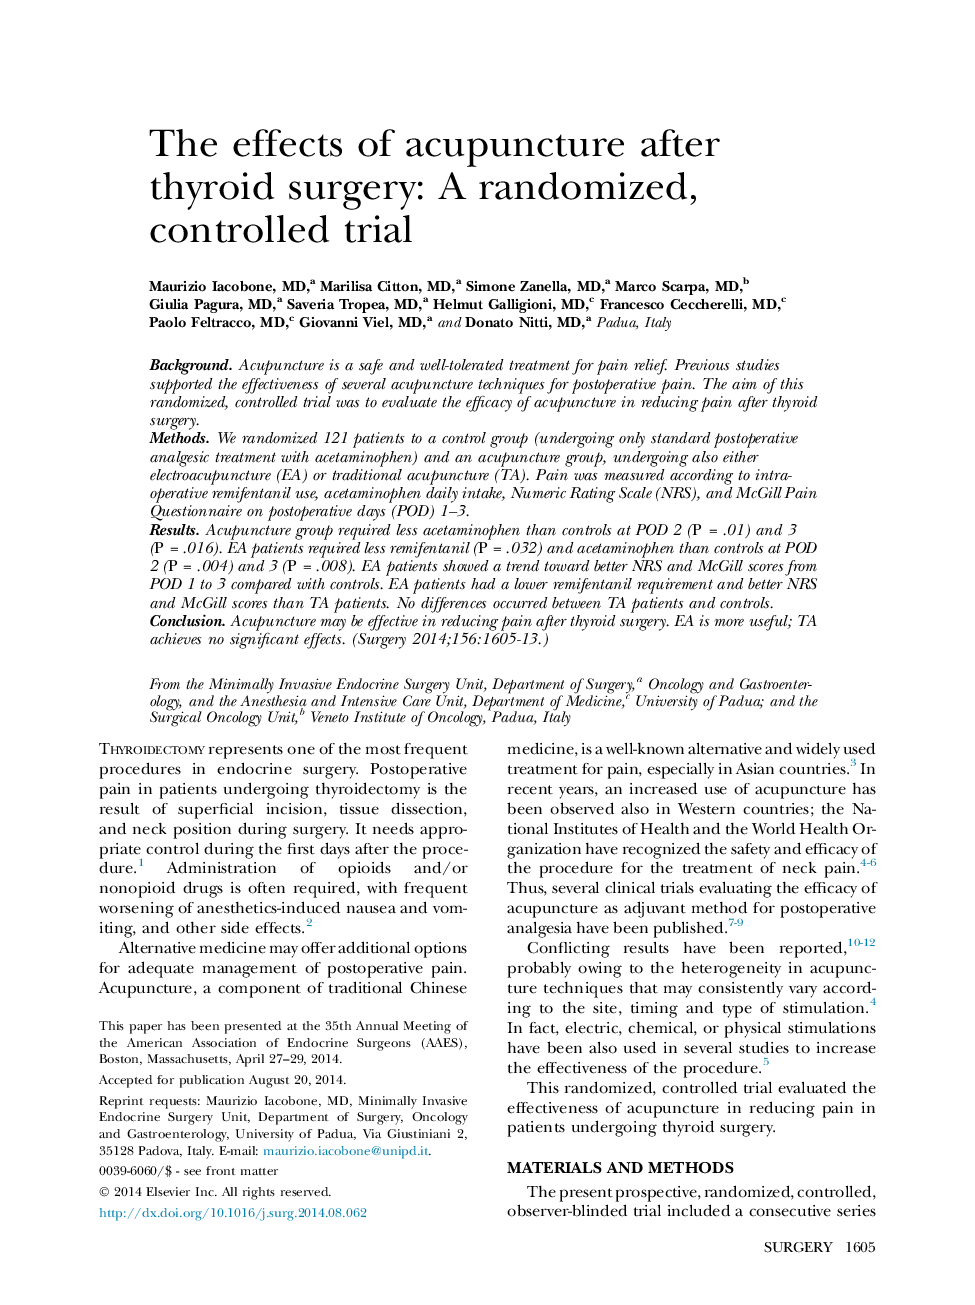 The effects of acupuncture after thyroid surgery: A randomized, controlled trial